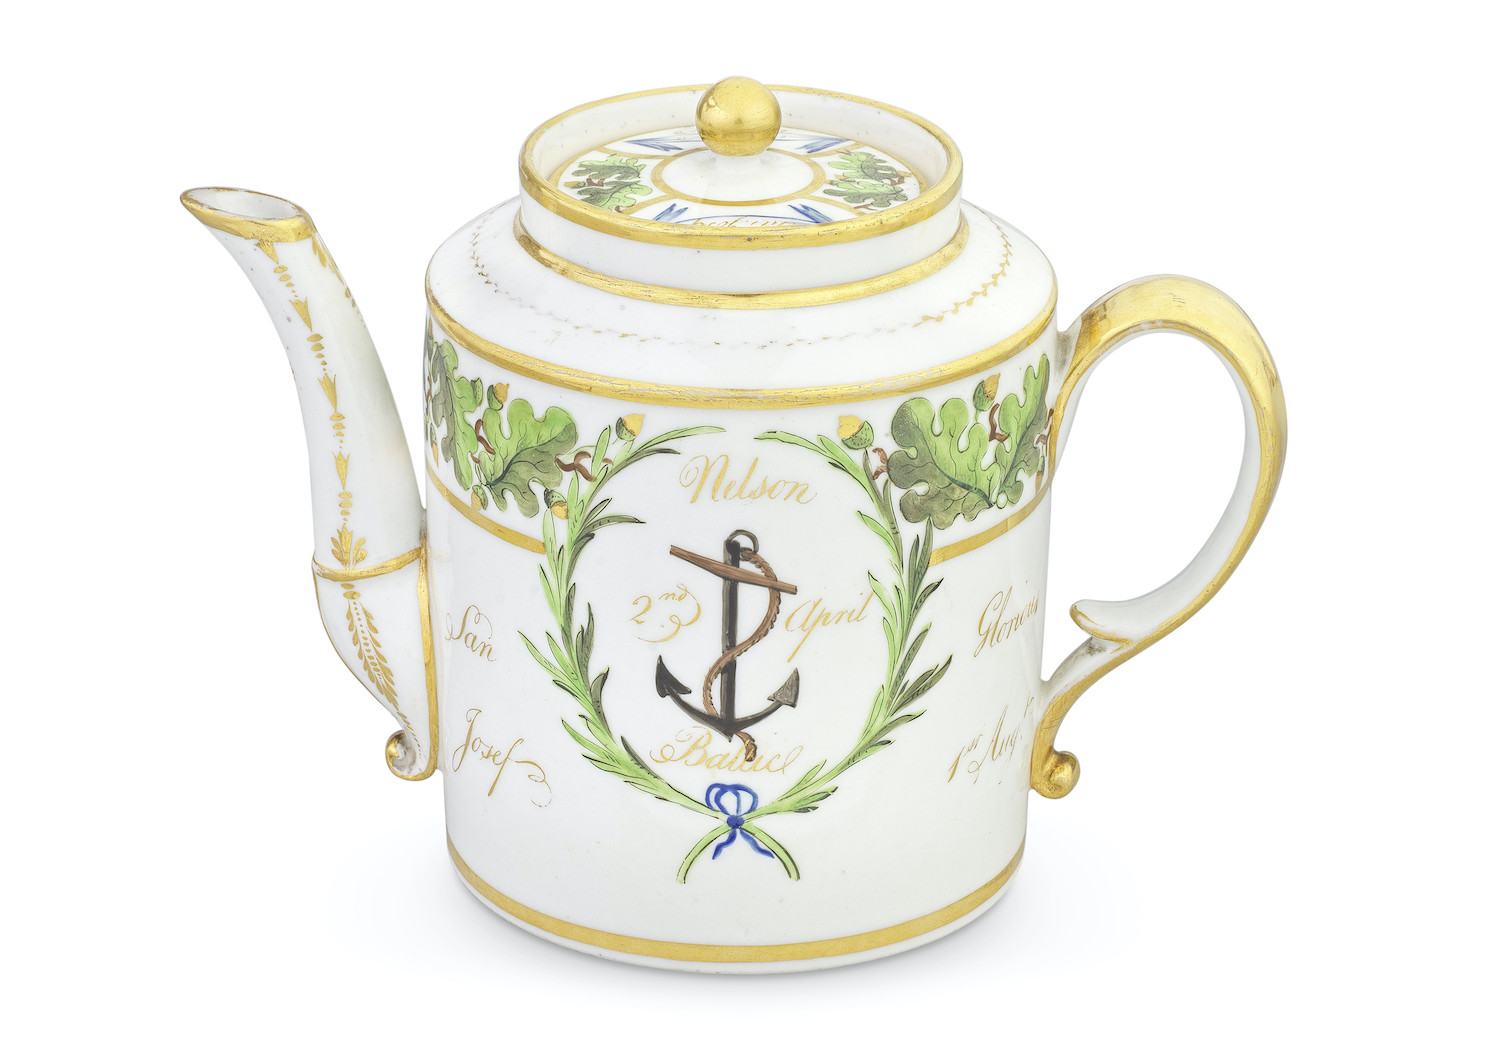 Nelson's 'Baltic' service. An important London-decorated Paris porcelain teapot and cover, circa 1802, estimated at £20,000-30,000